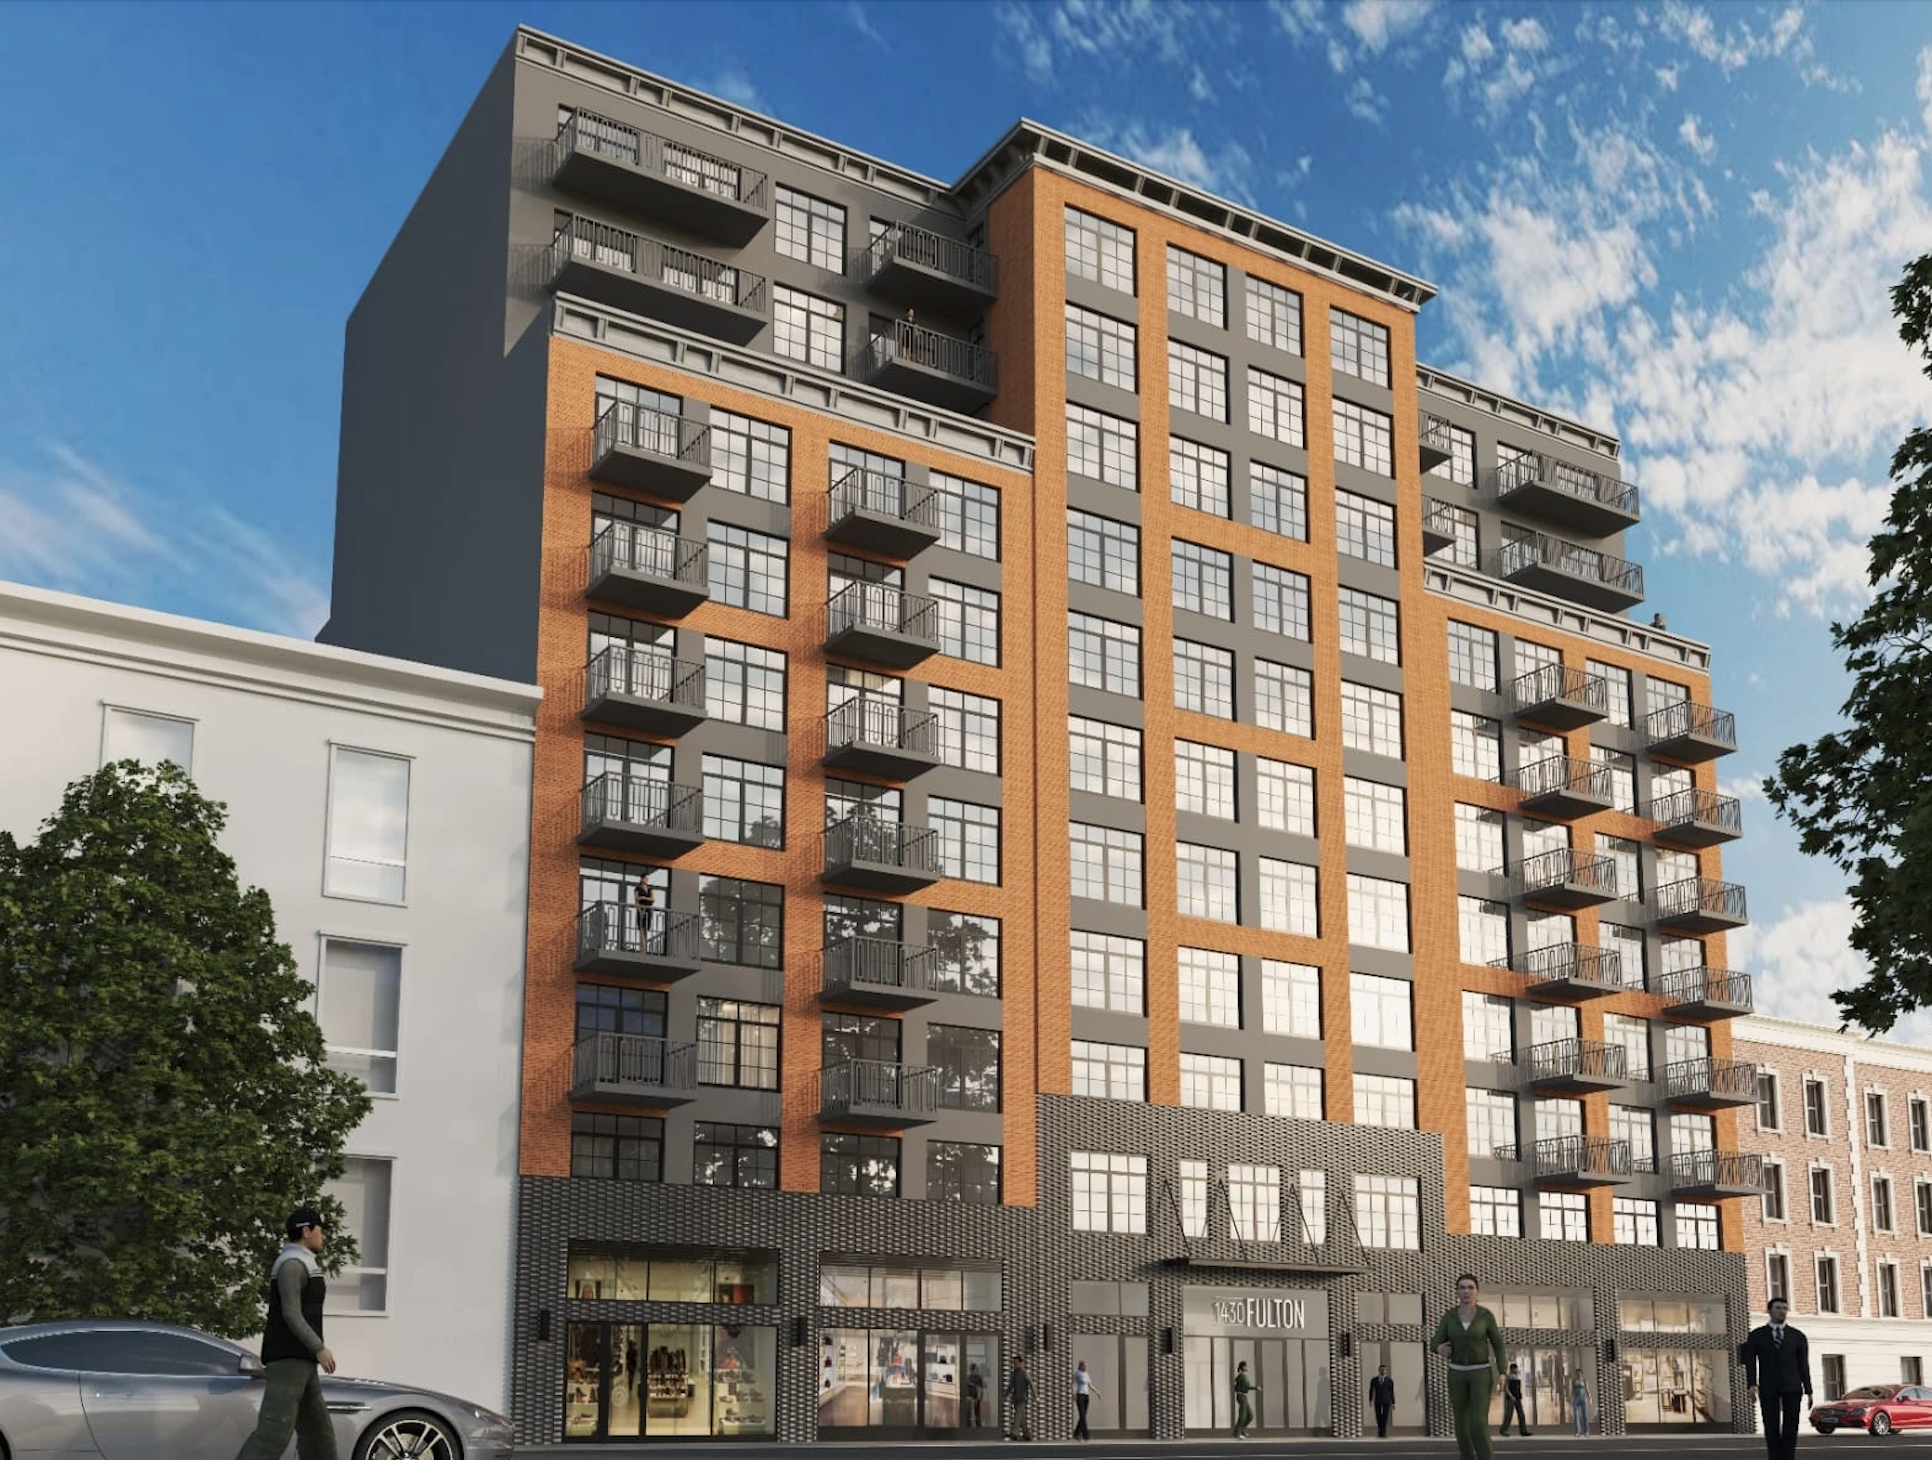 Fulton Crossing Brings New Heights To Bed-Stuy